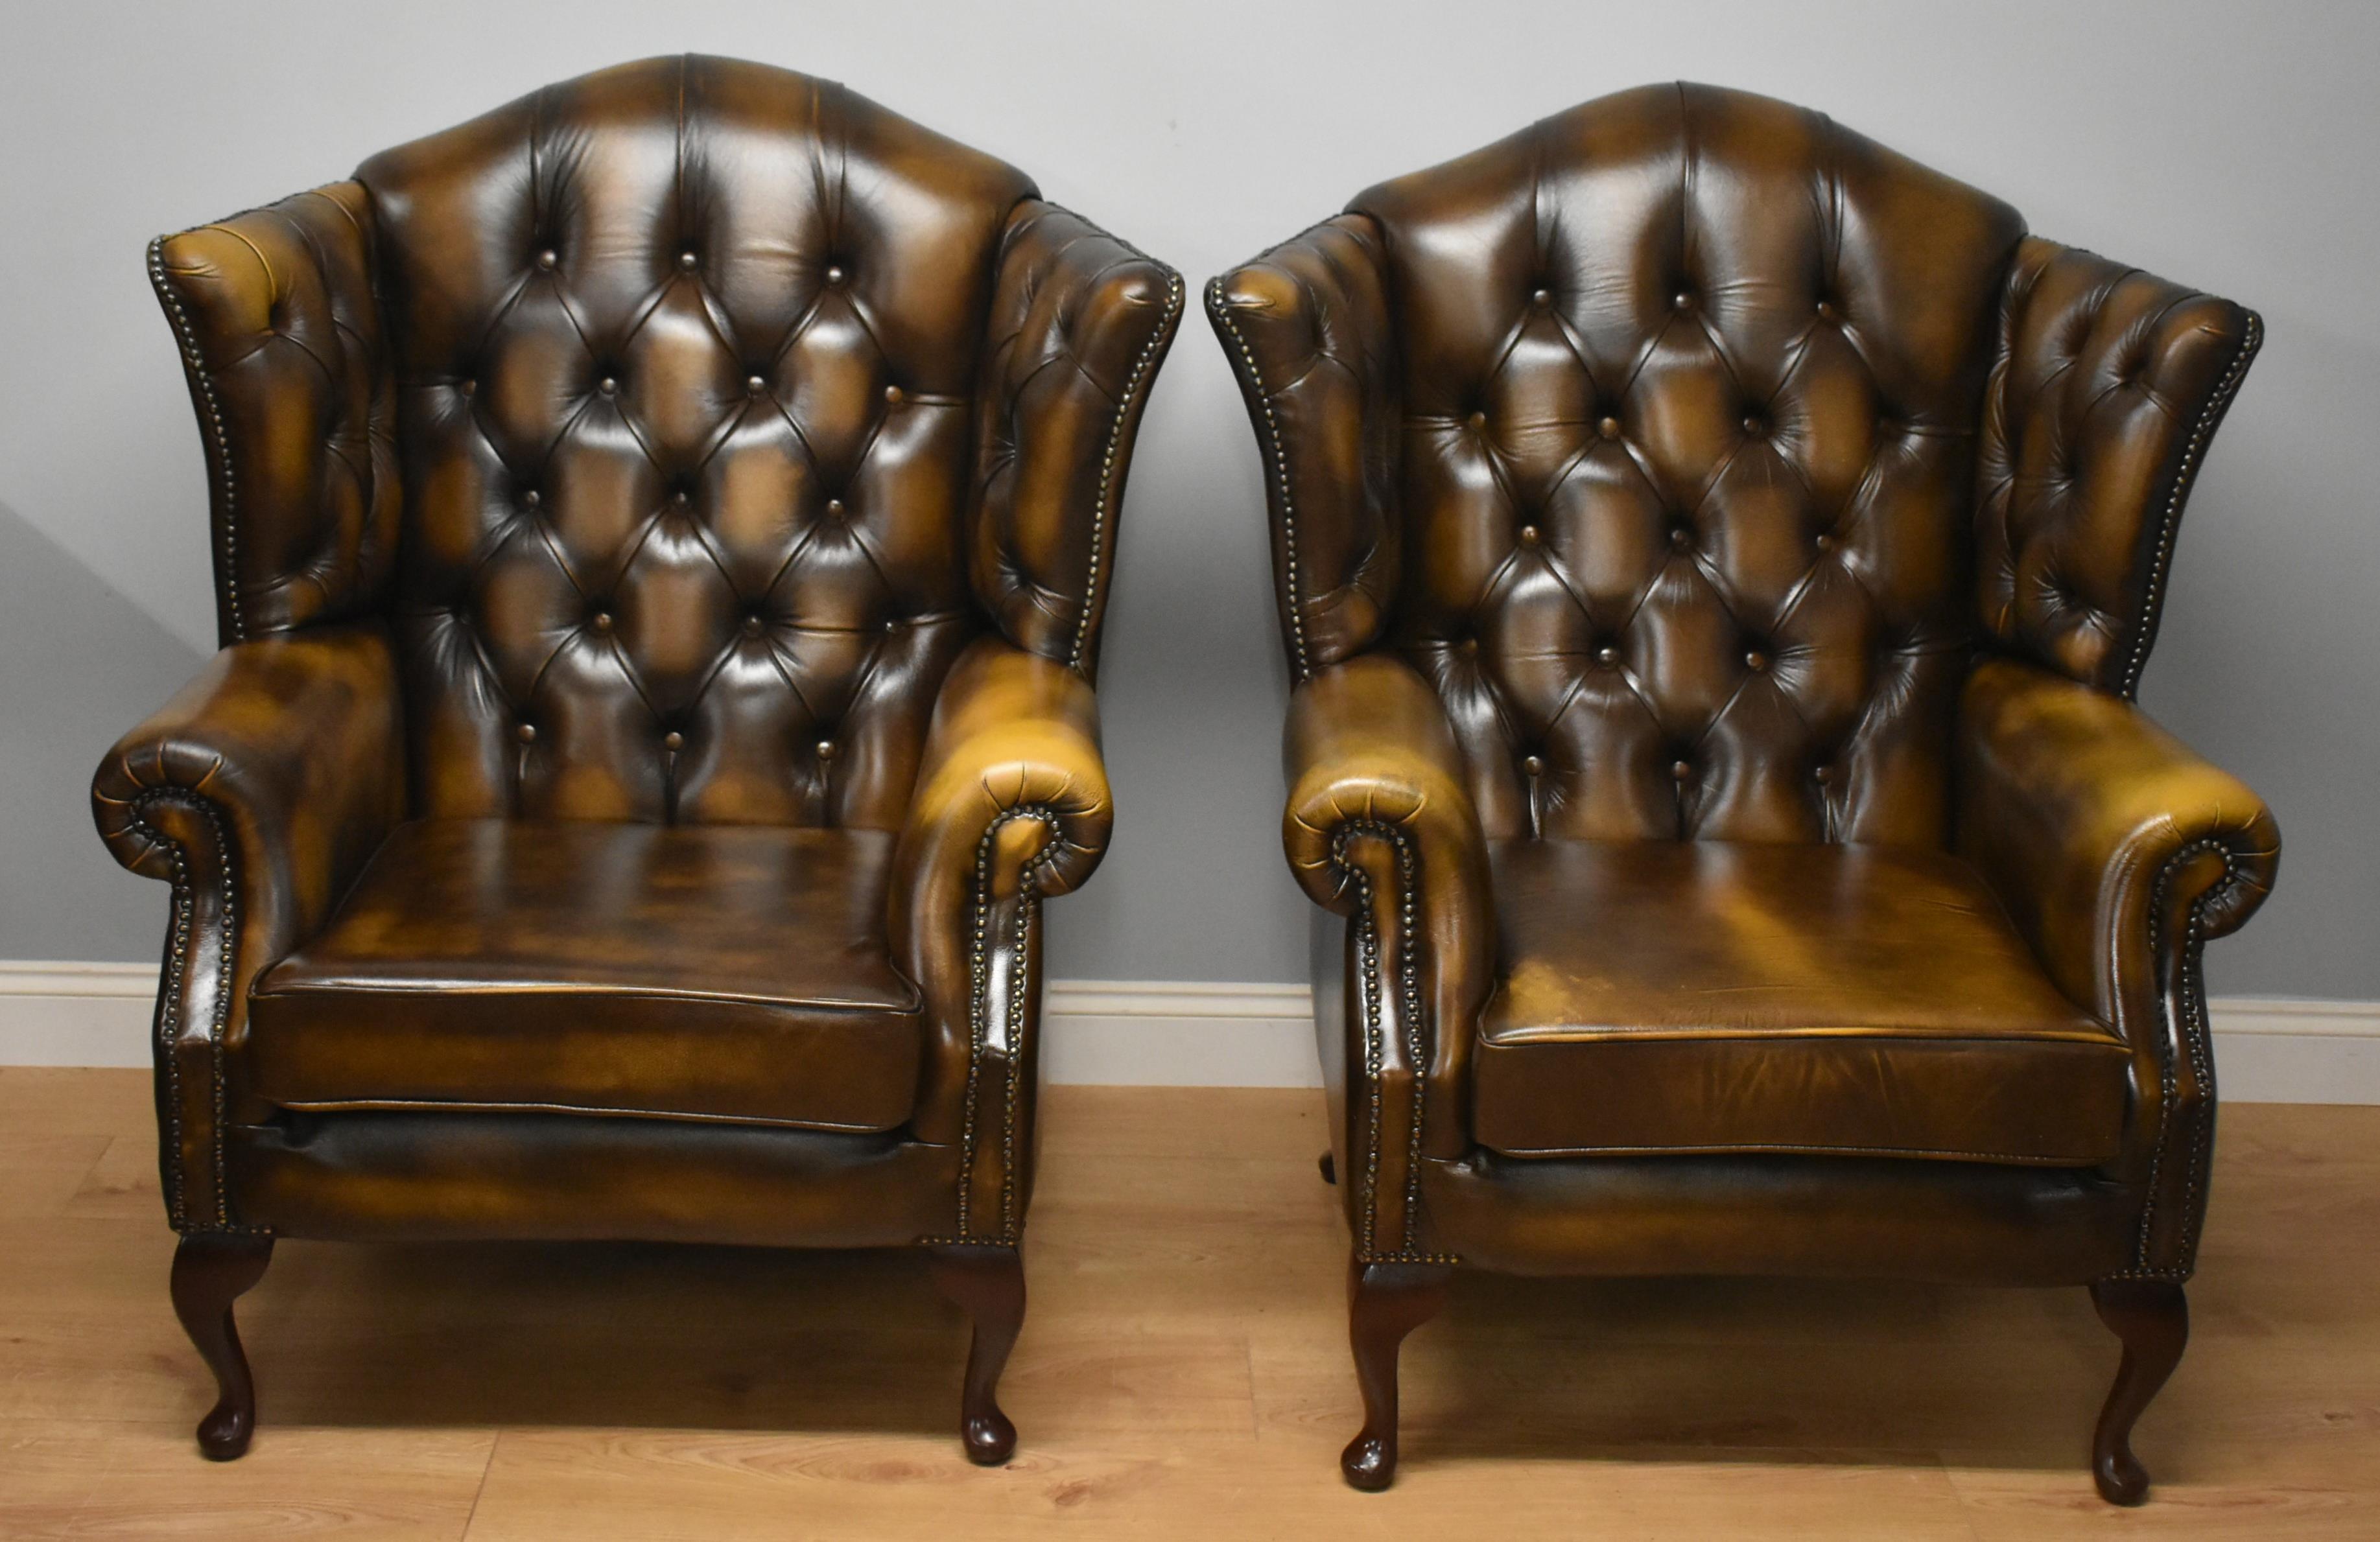 Pair of Chesterfield button back  leather chairs by Thomas Lloyd in very nice condition standing on cabriol legs.